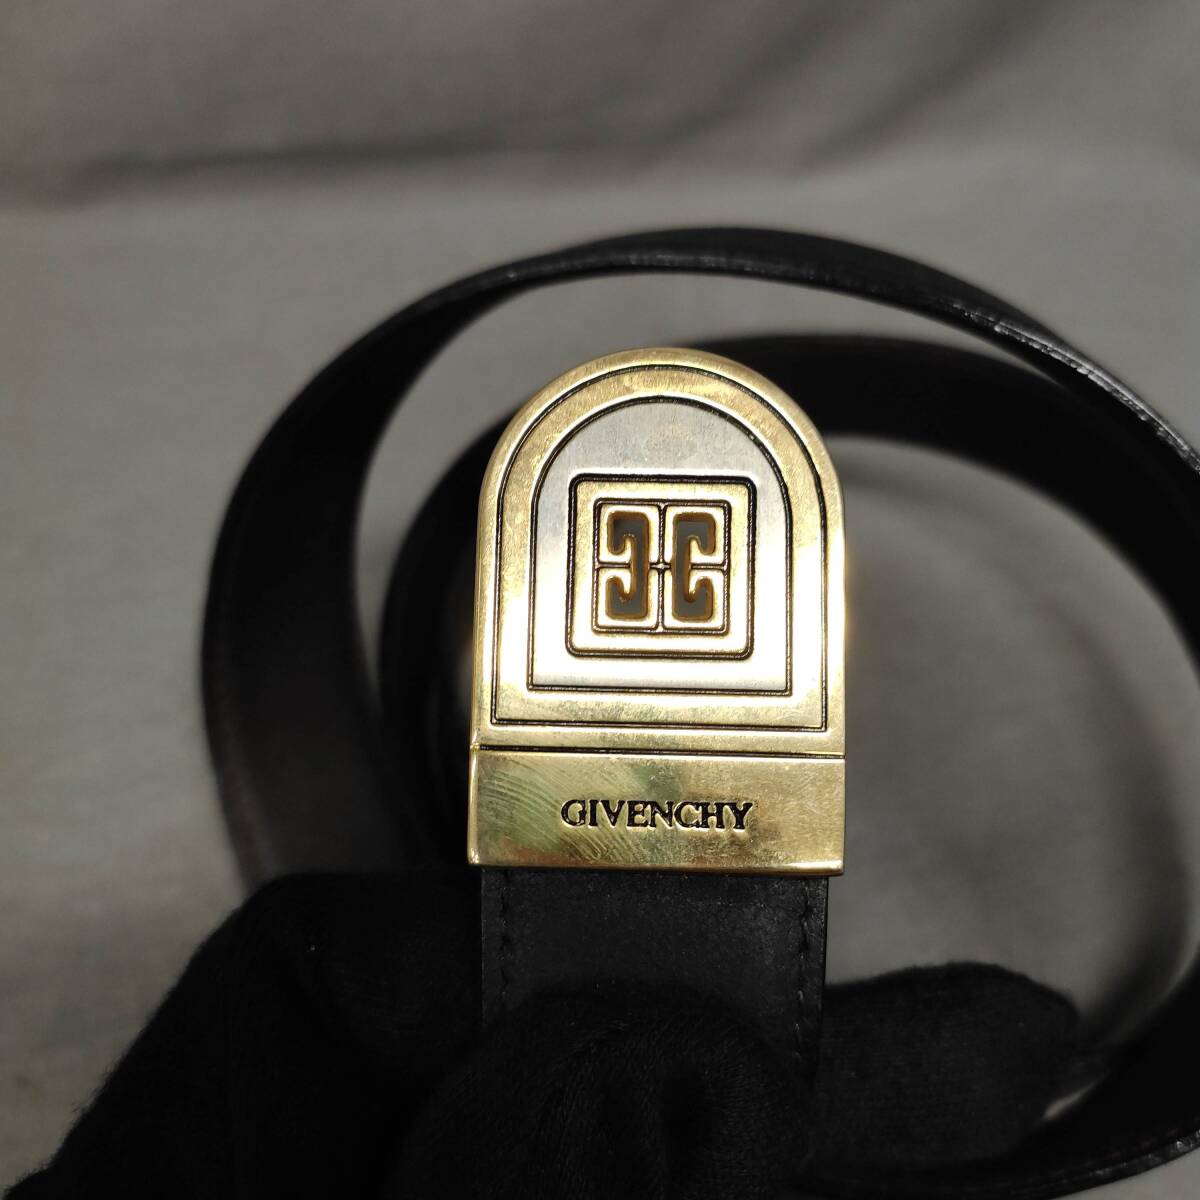 060327 255052 GIVENCHY Givenchy belt leather black Gold color metal fittings total length : approximately 112cm clothing accessories fashion accessories USED goods 